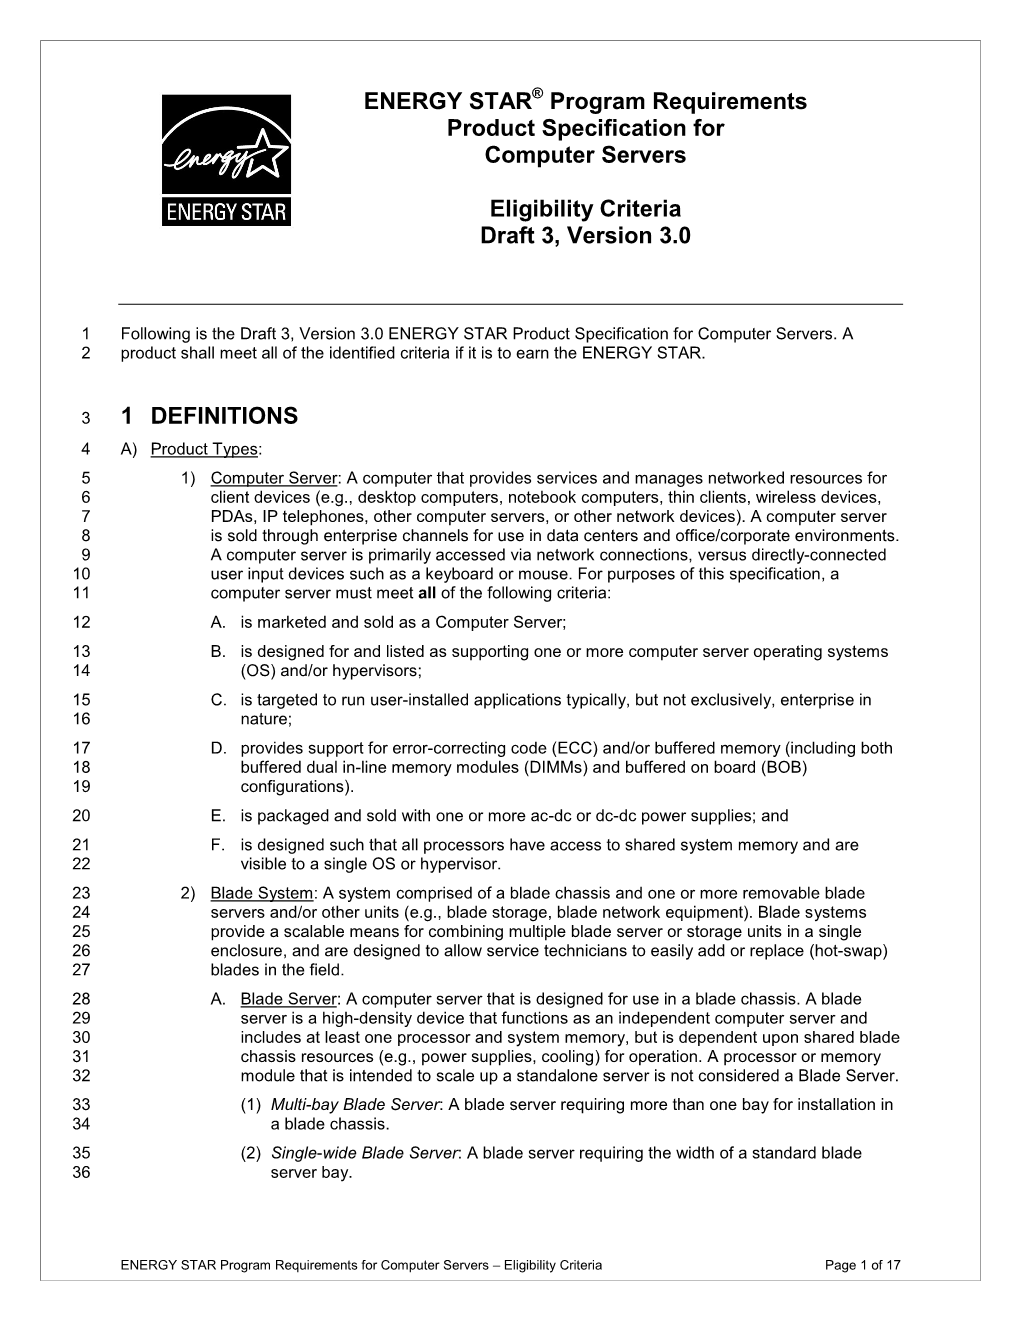 Computer Servers Version 3.0 Draft 3 Specification